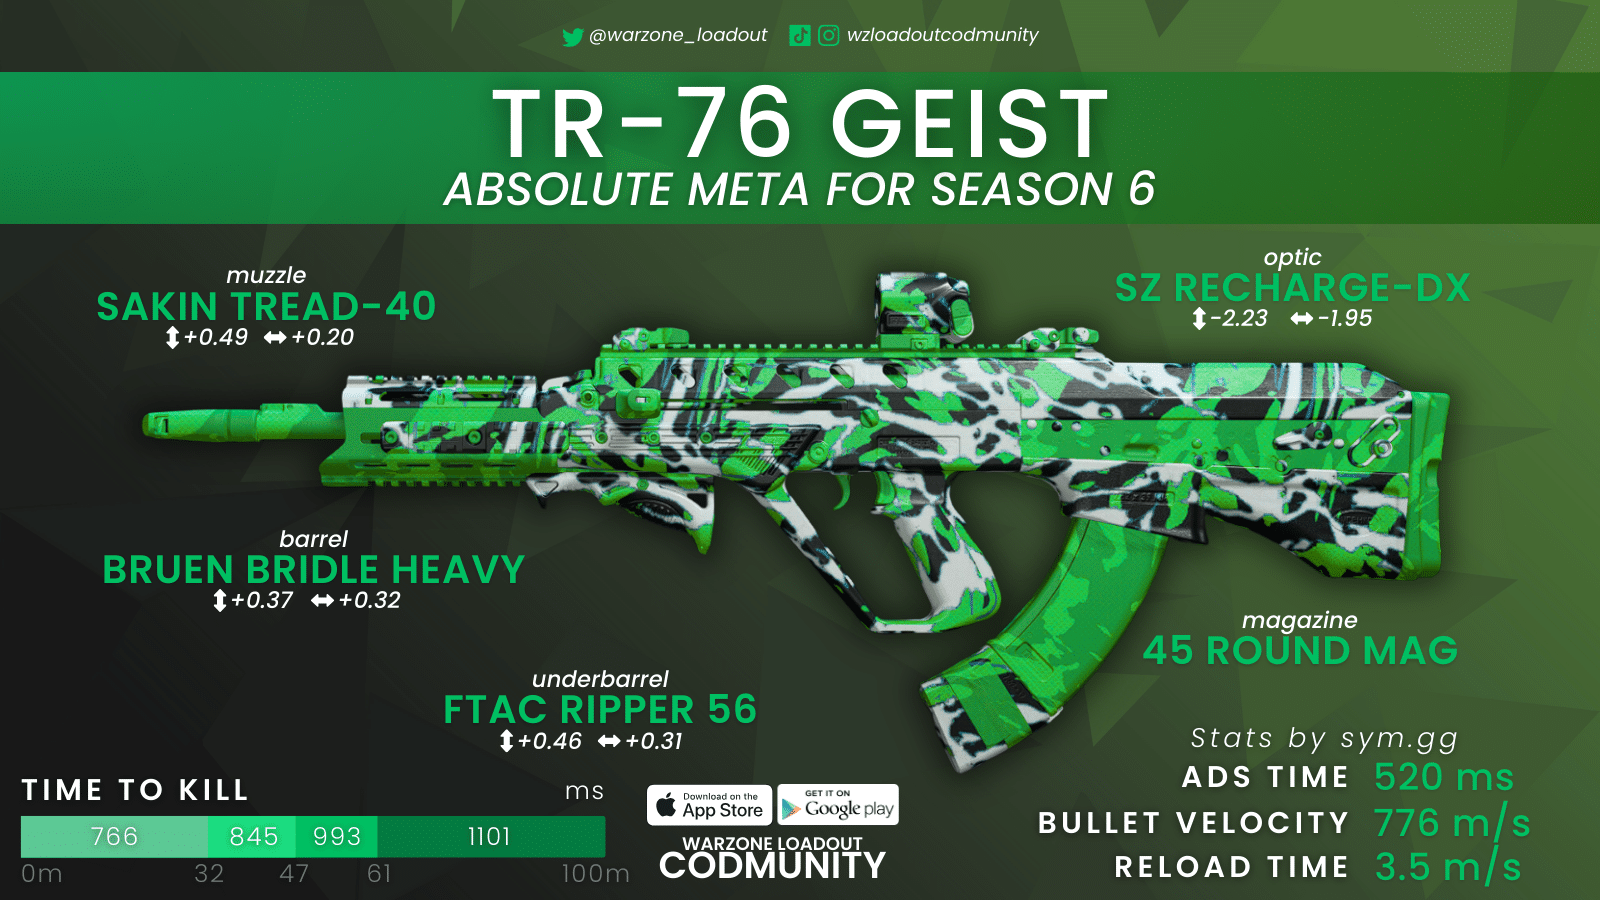 This is the Best Meta Assault Rifle in Warzone Season 6 - Best TR-76 Geist Loadout